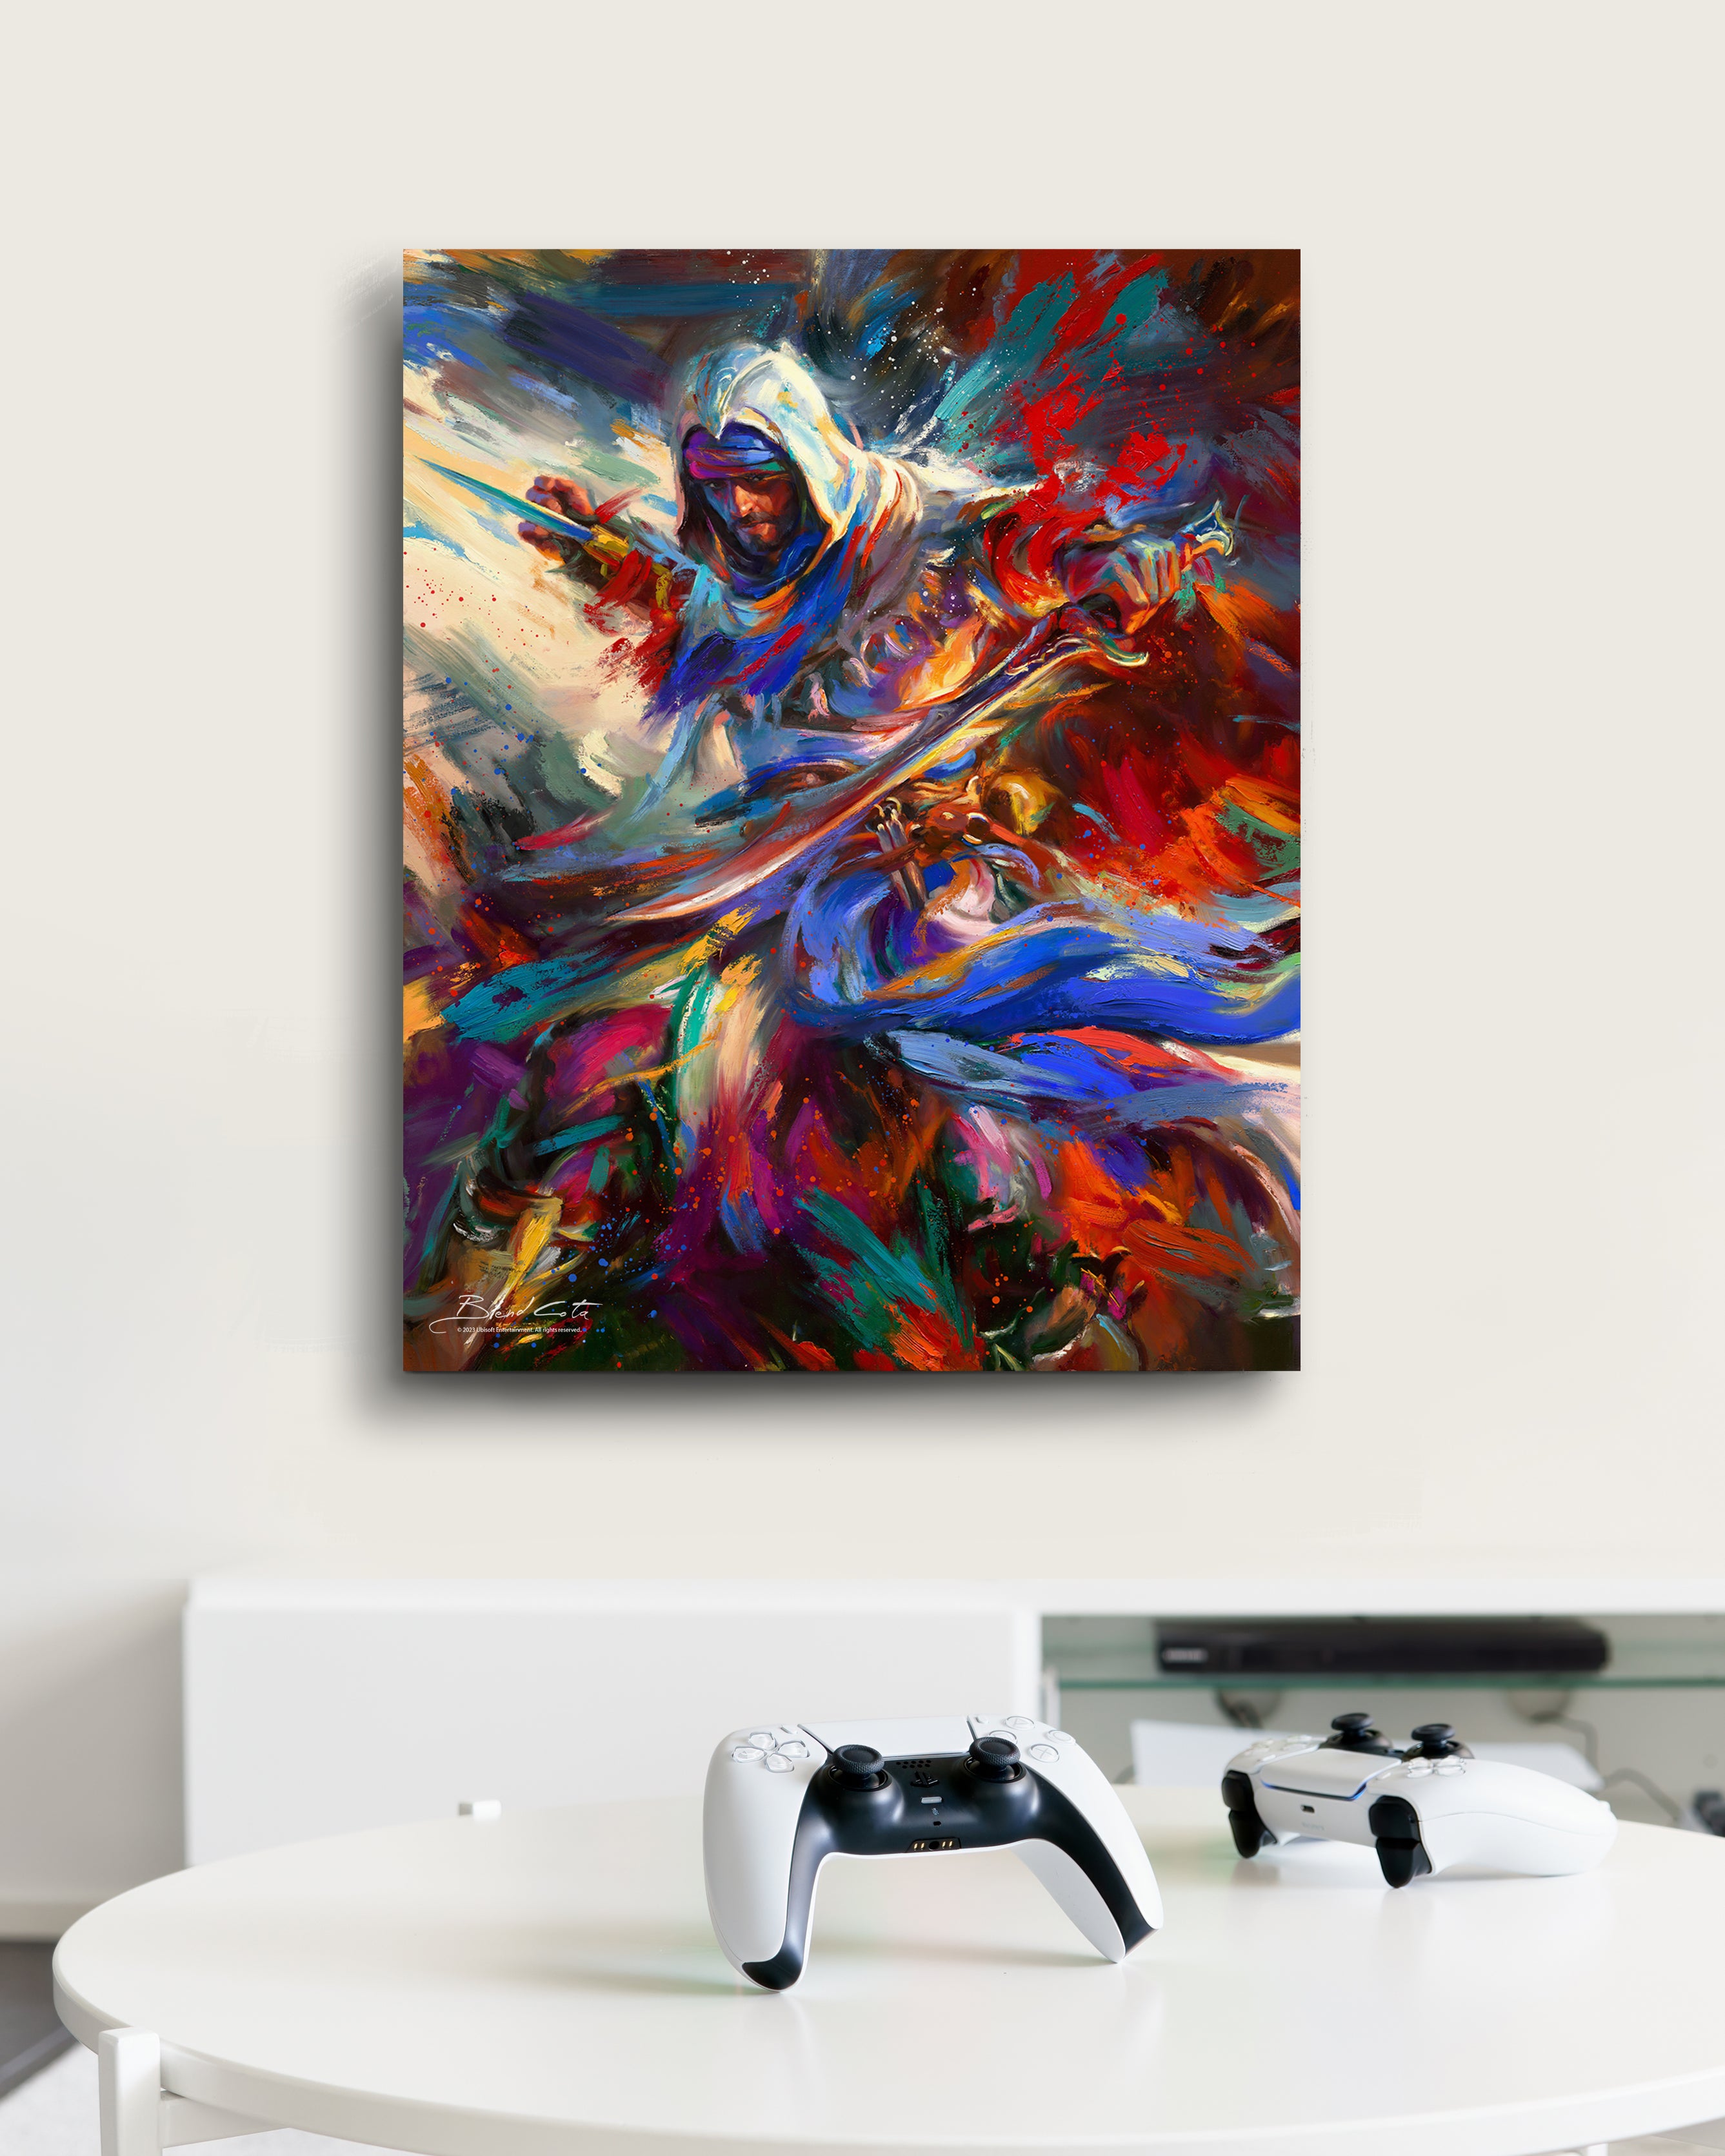 Limited edition artwork on canvas of Assassin's Creed Basim of Mirage bursting forth with energy and painted with colorful brushstrokes in an expressionistic style in a room setting.